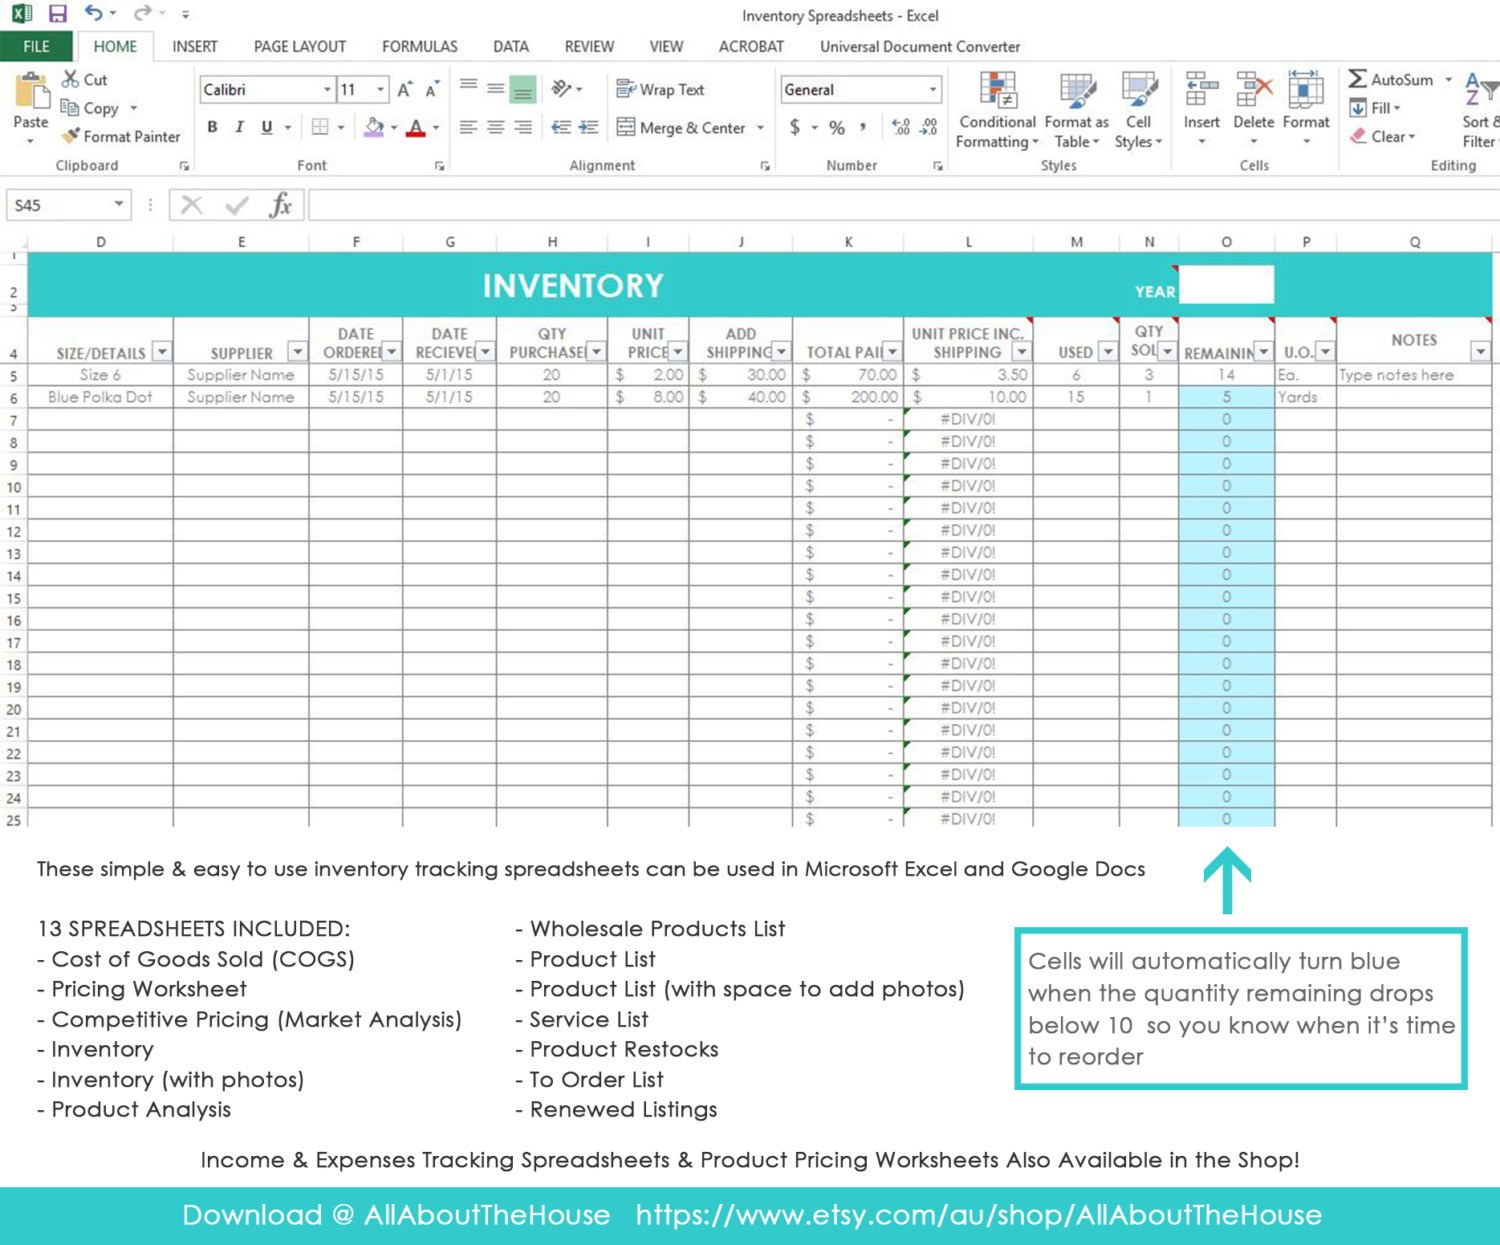 Azure Pricing Spreadsheet Throughout Azure Pricing Spreadsheet With Spreadsheet For Mac Spreadsheet For